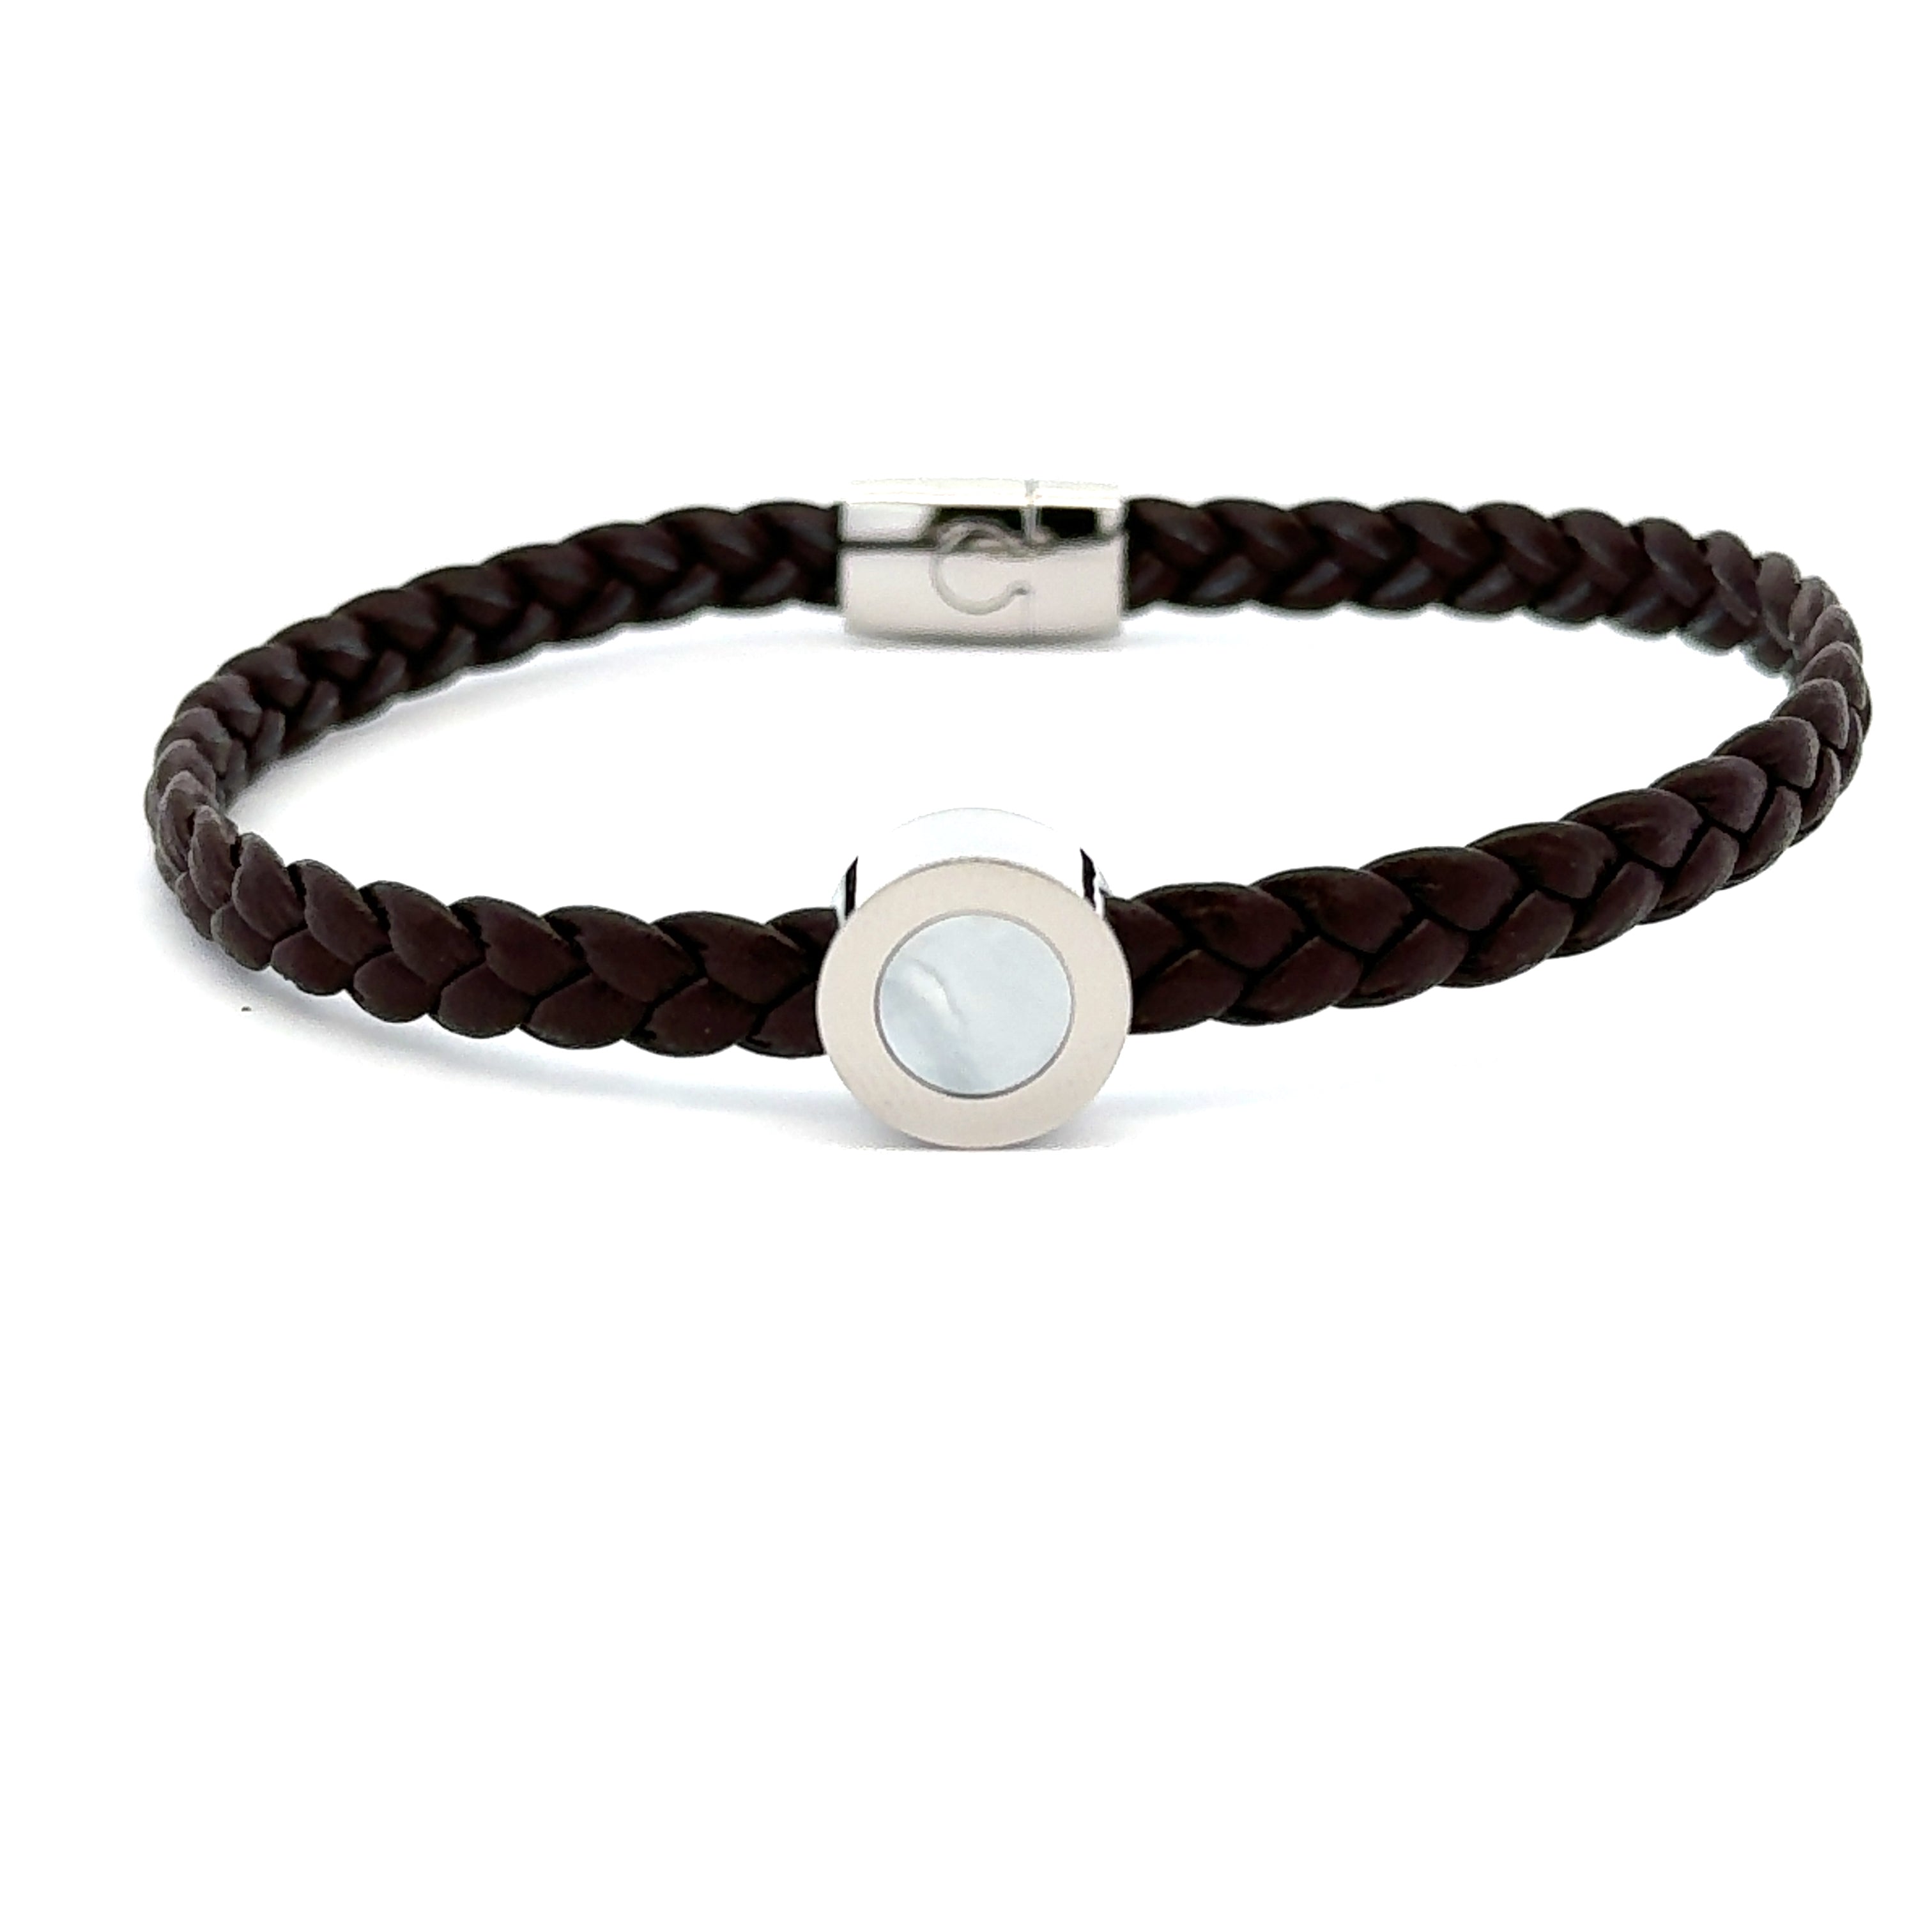 Stainless Steel Braided Brown Leather Bracelet with White Mother of Pearl